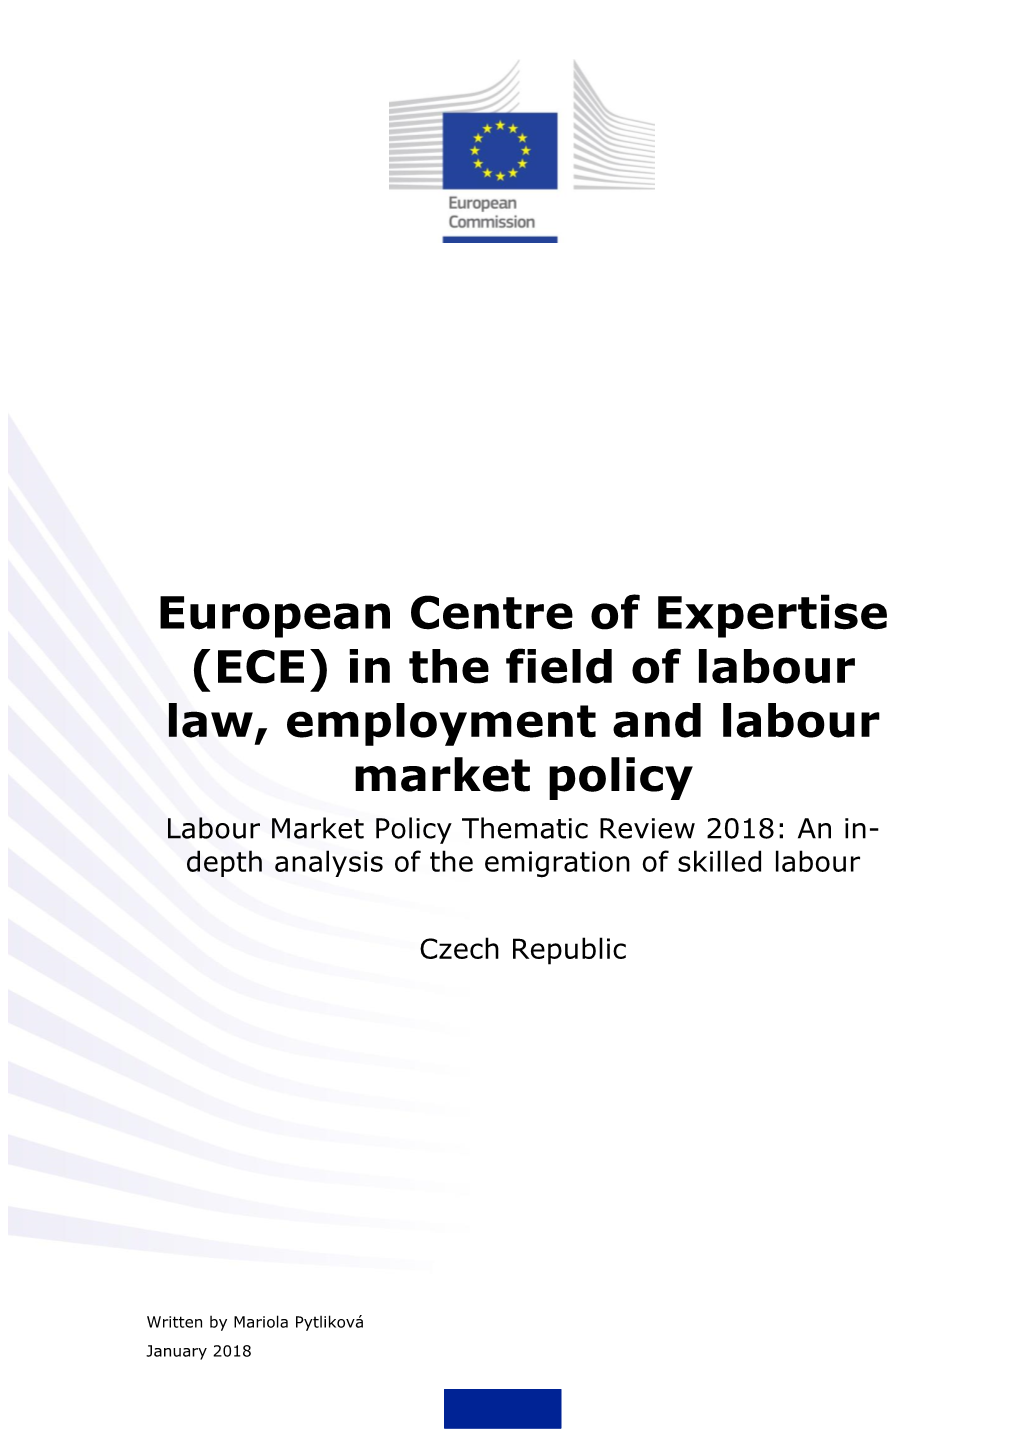 European Centre of Expertise (ECE) in the Field of Labour Law, Employment and Labour Market Policy